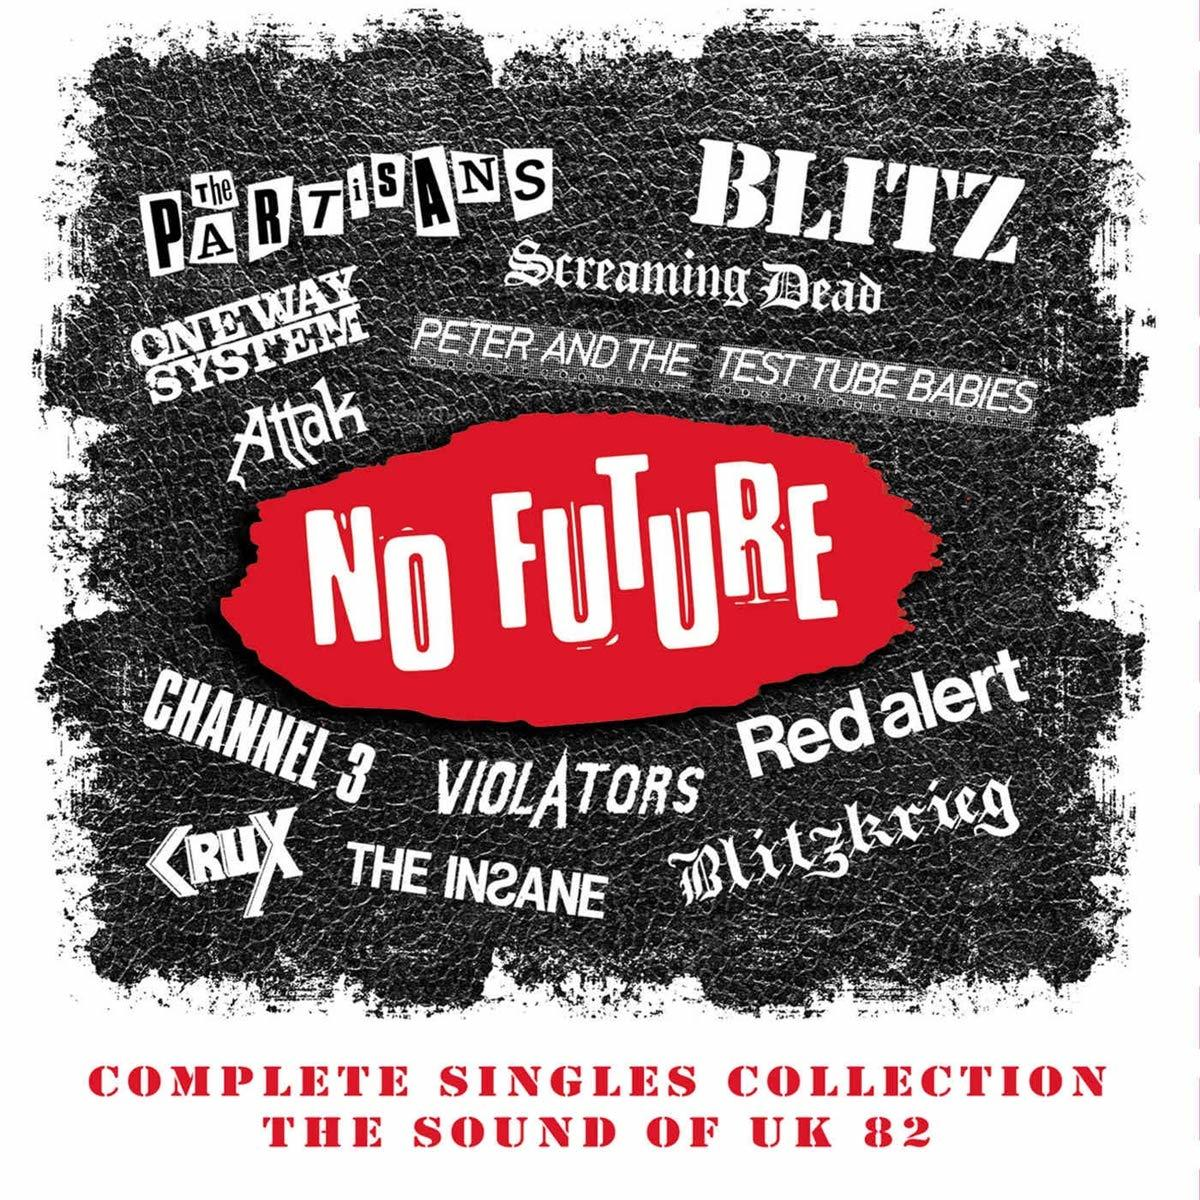 VARIOUS - No Future: Complete Sound Singles (CD) - Collection-The